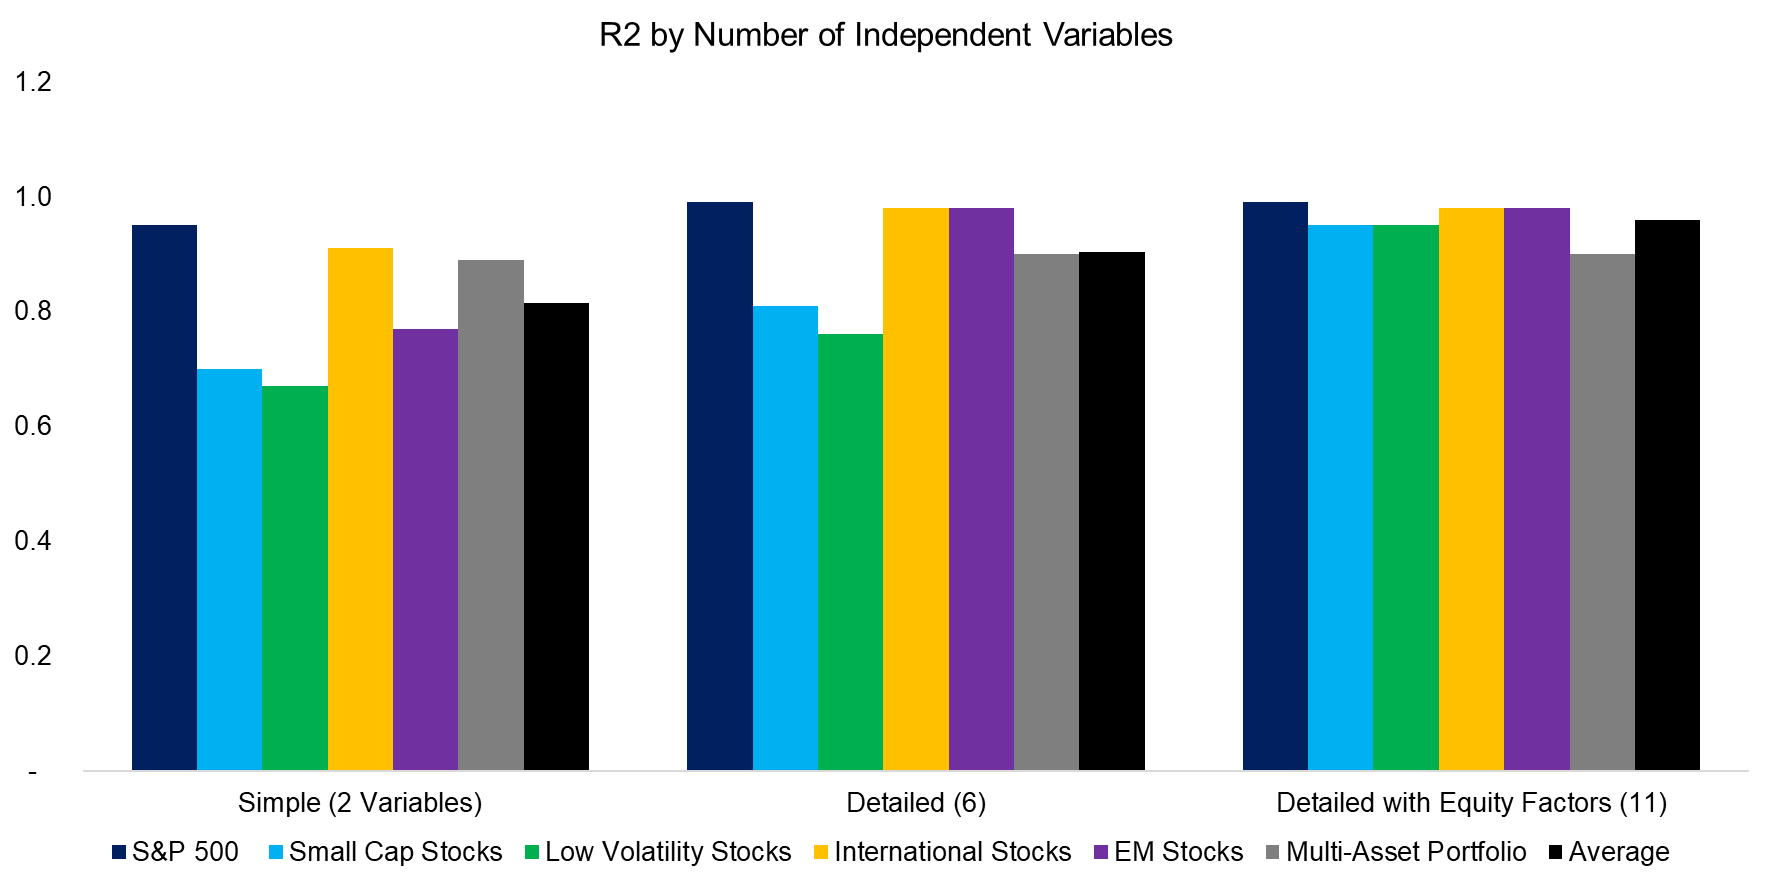 R2 by Number of Independent Variables